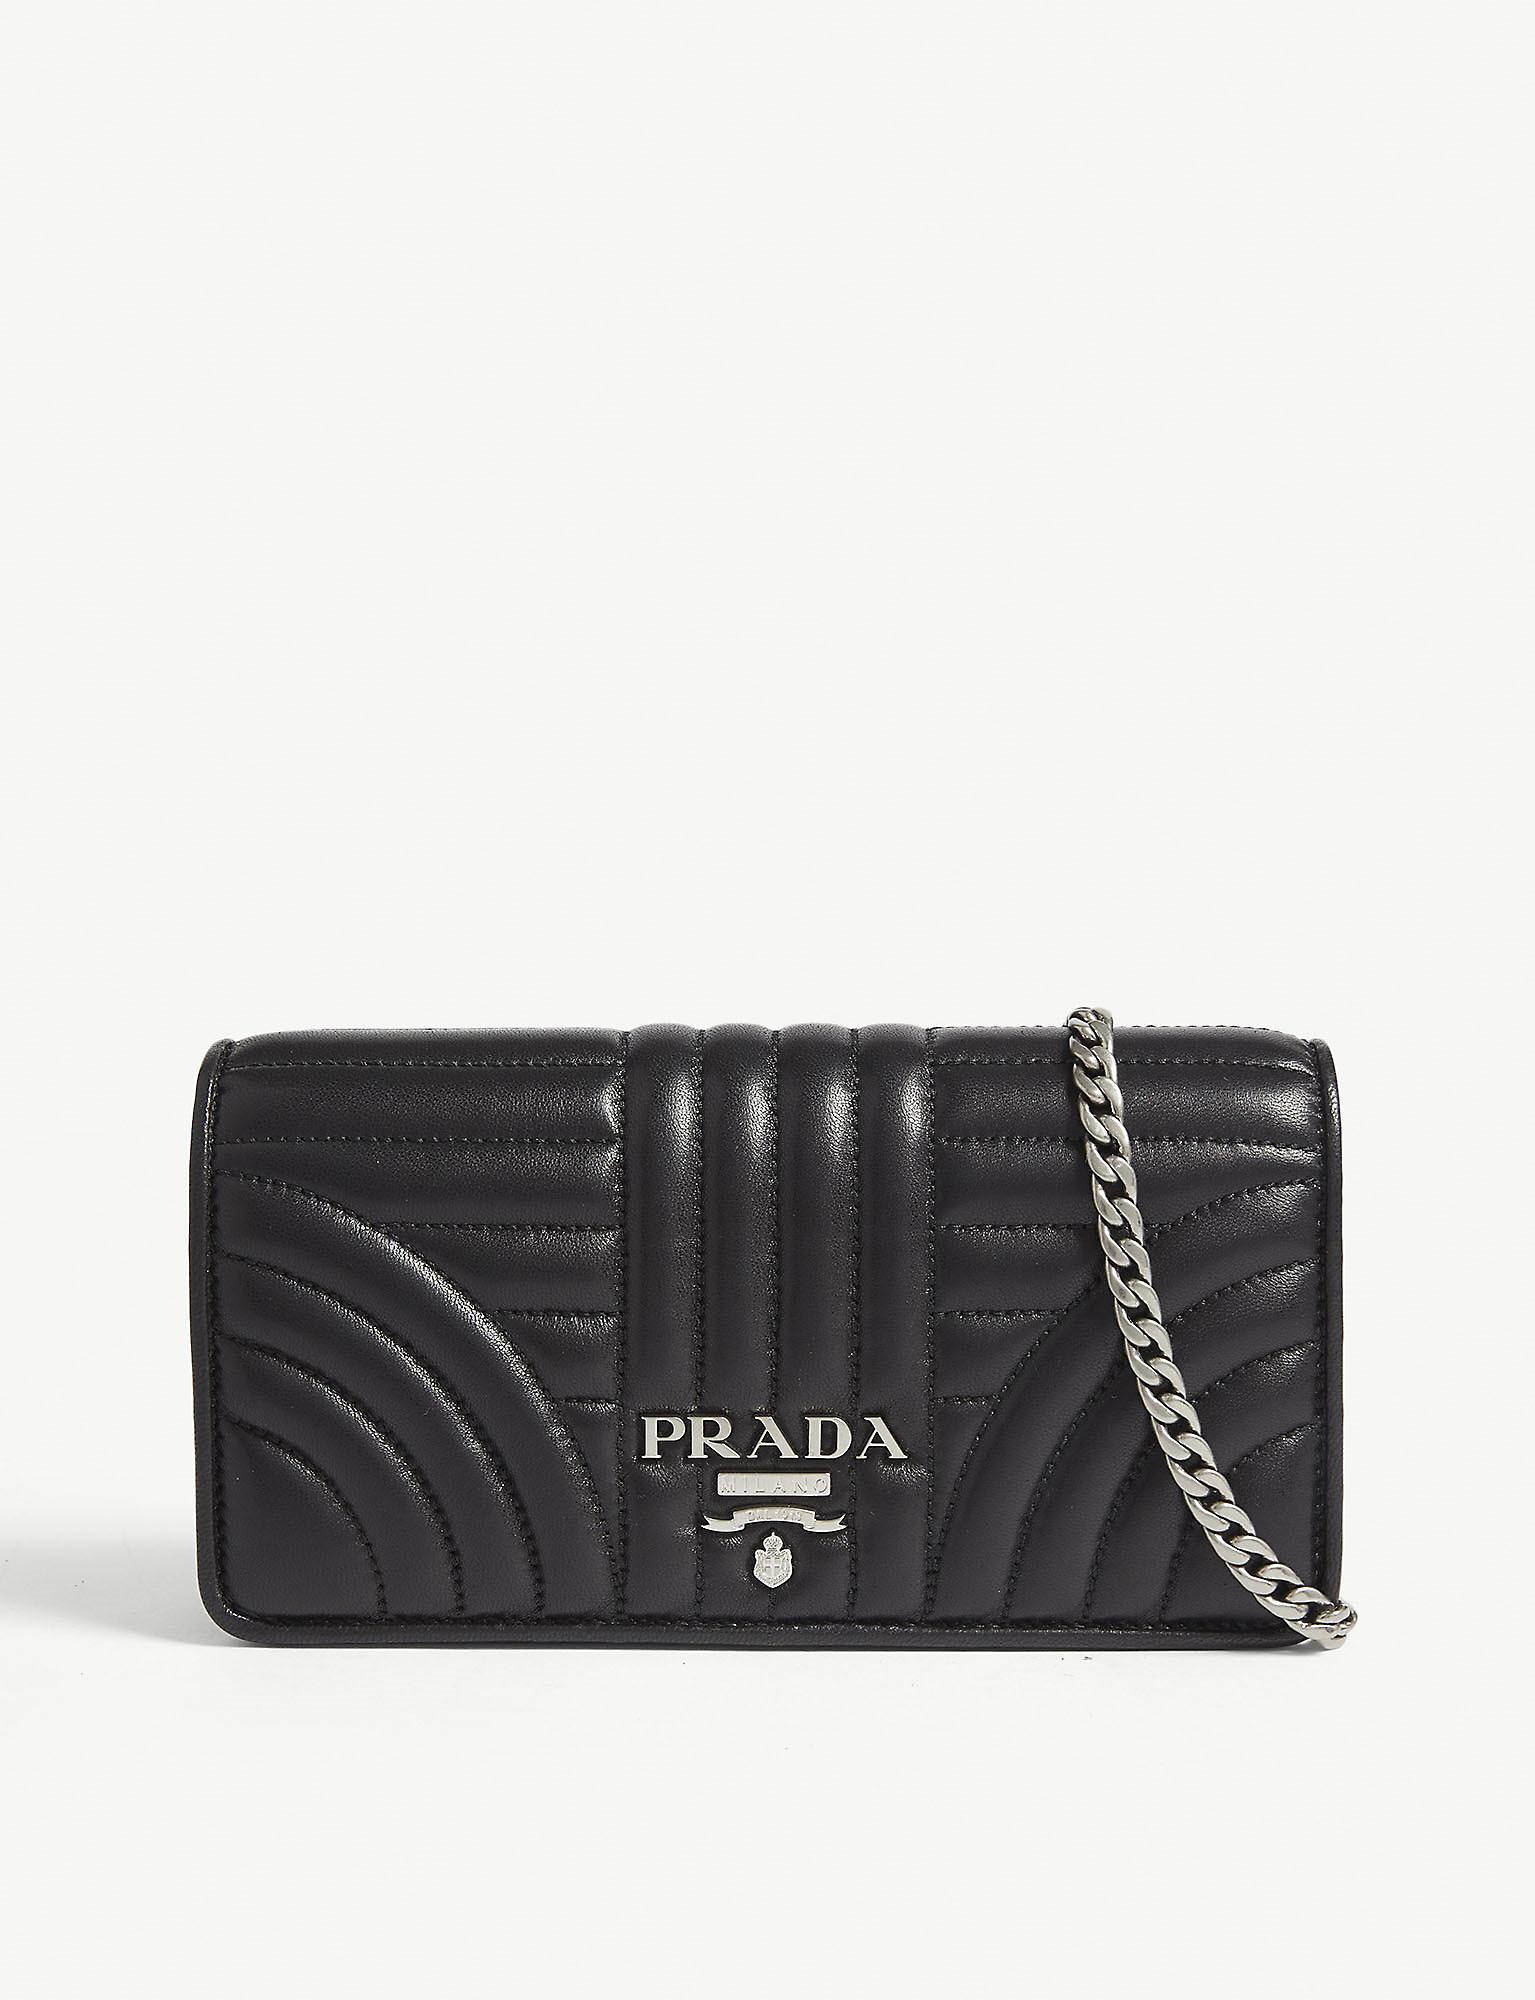 Prada Quilted Leather Wallet On Chain in Black Silver (Black) - Lyst